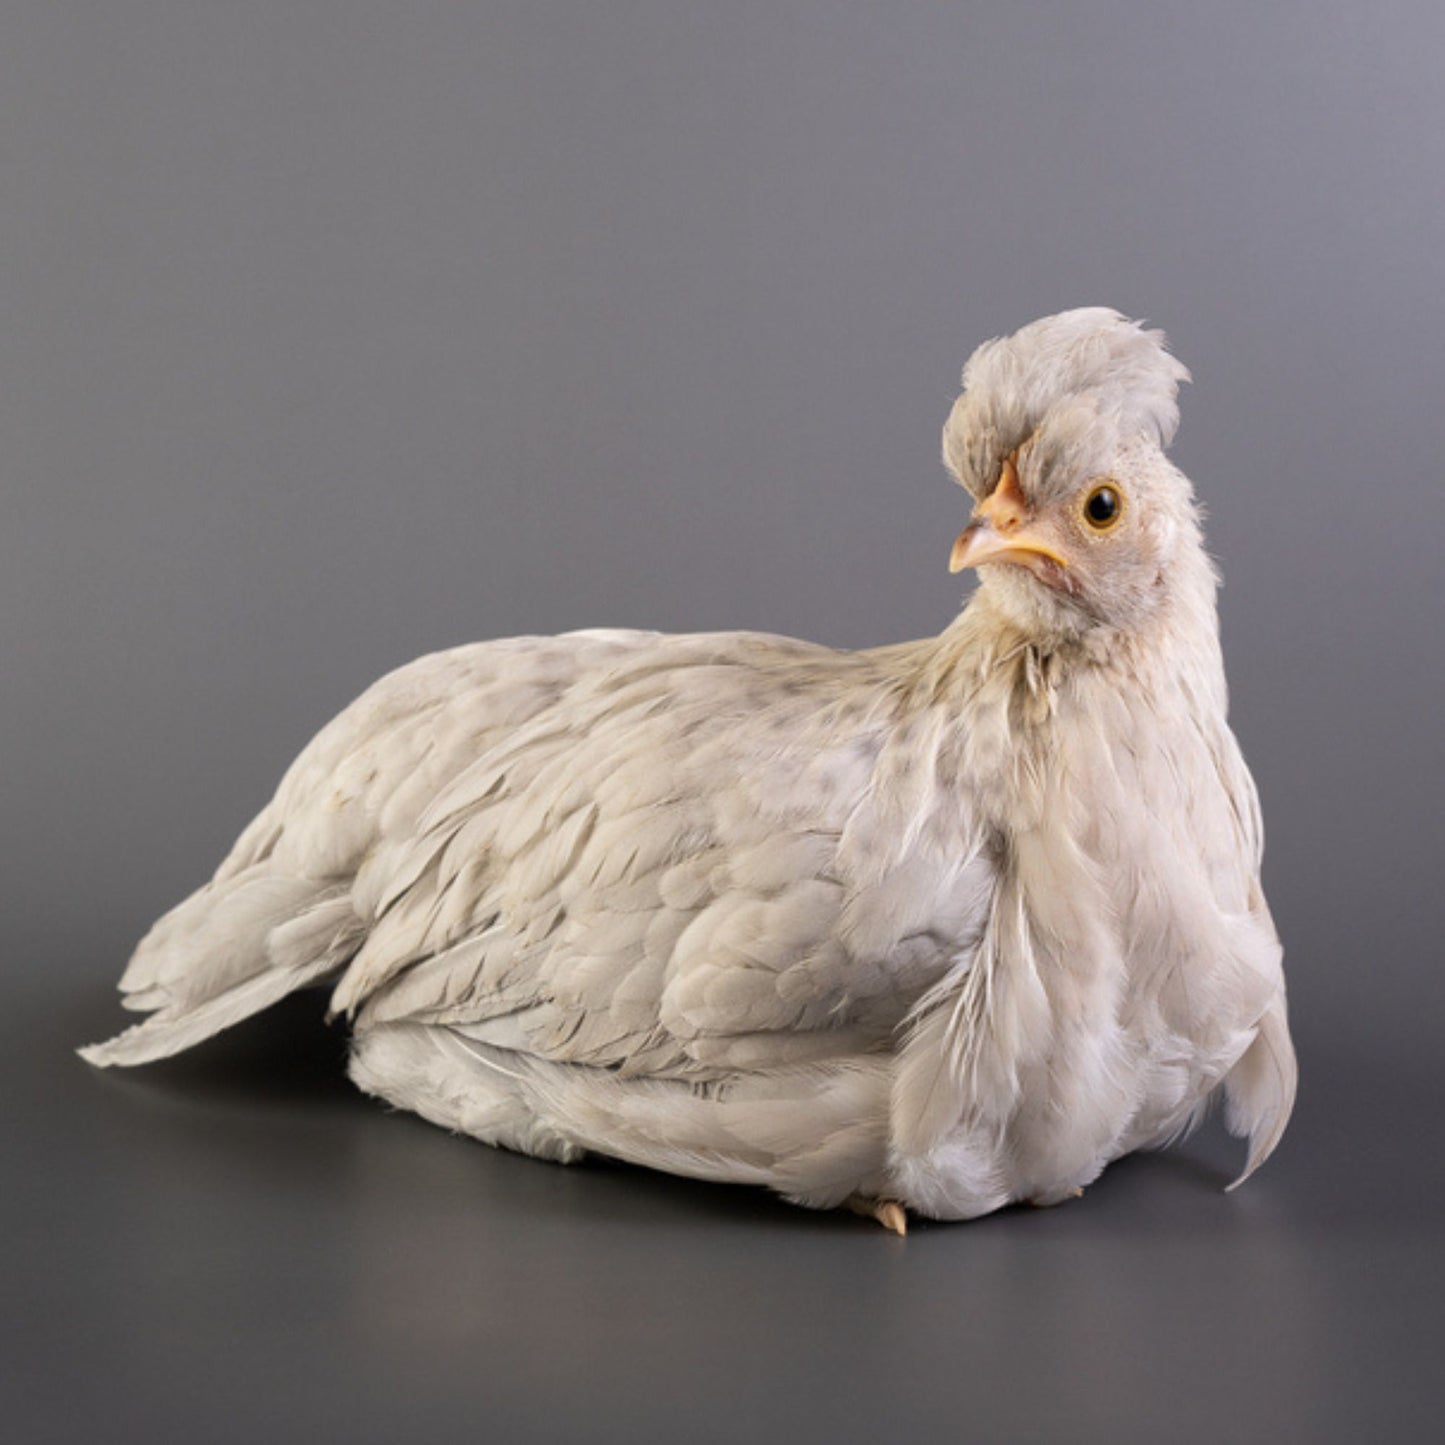 Opal Legbar chickens have a friendly personality.